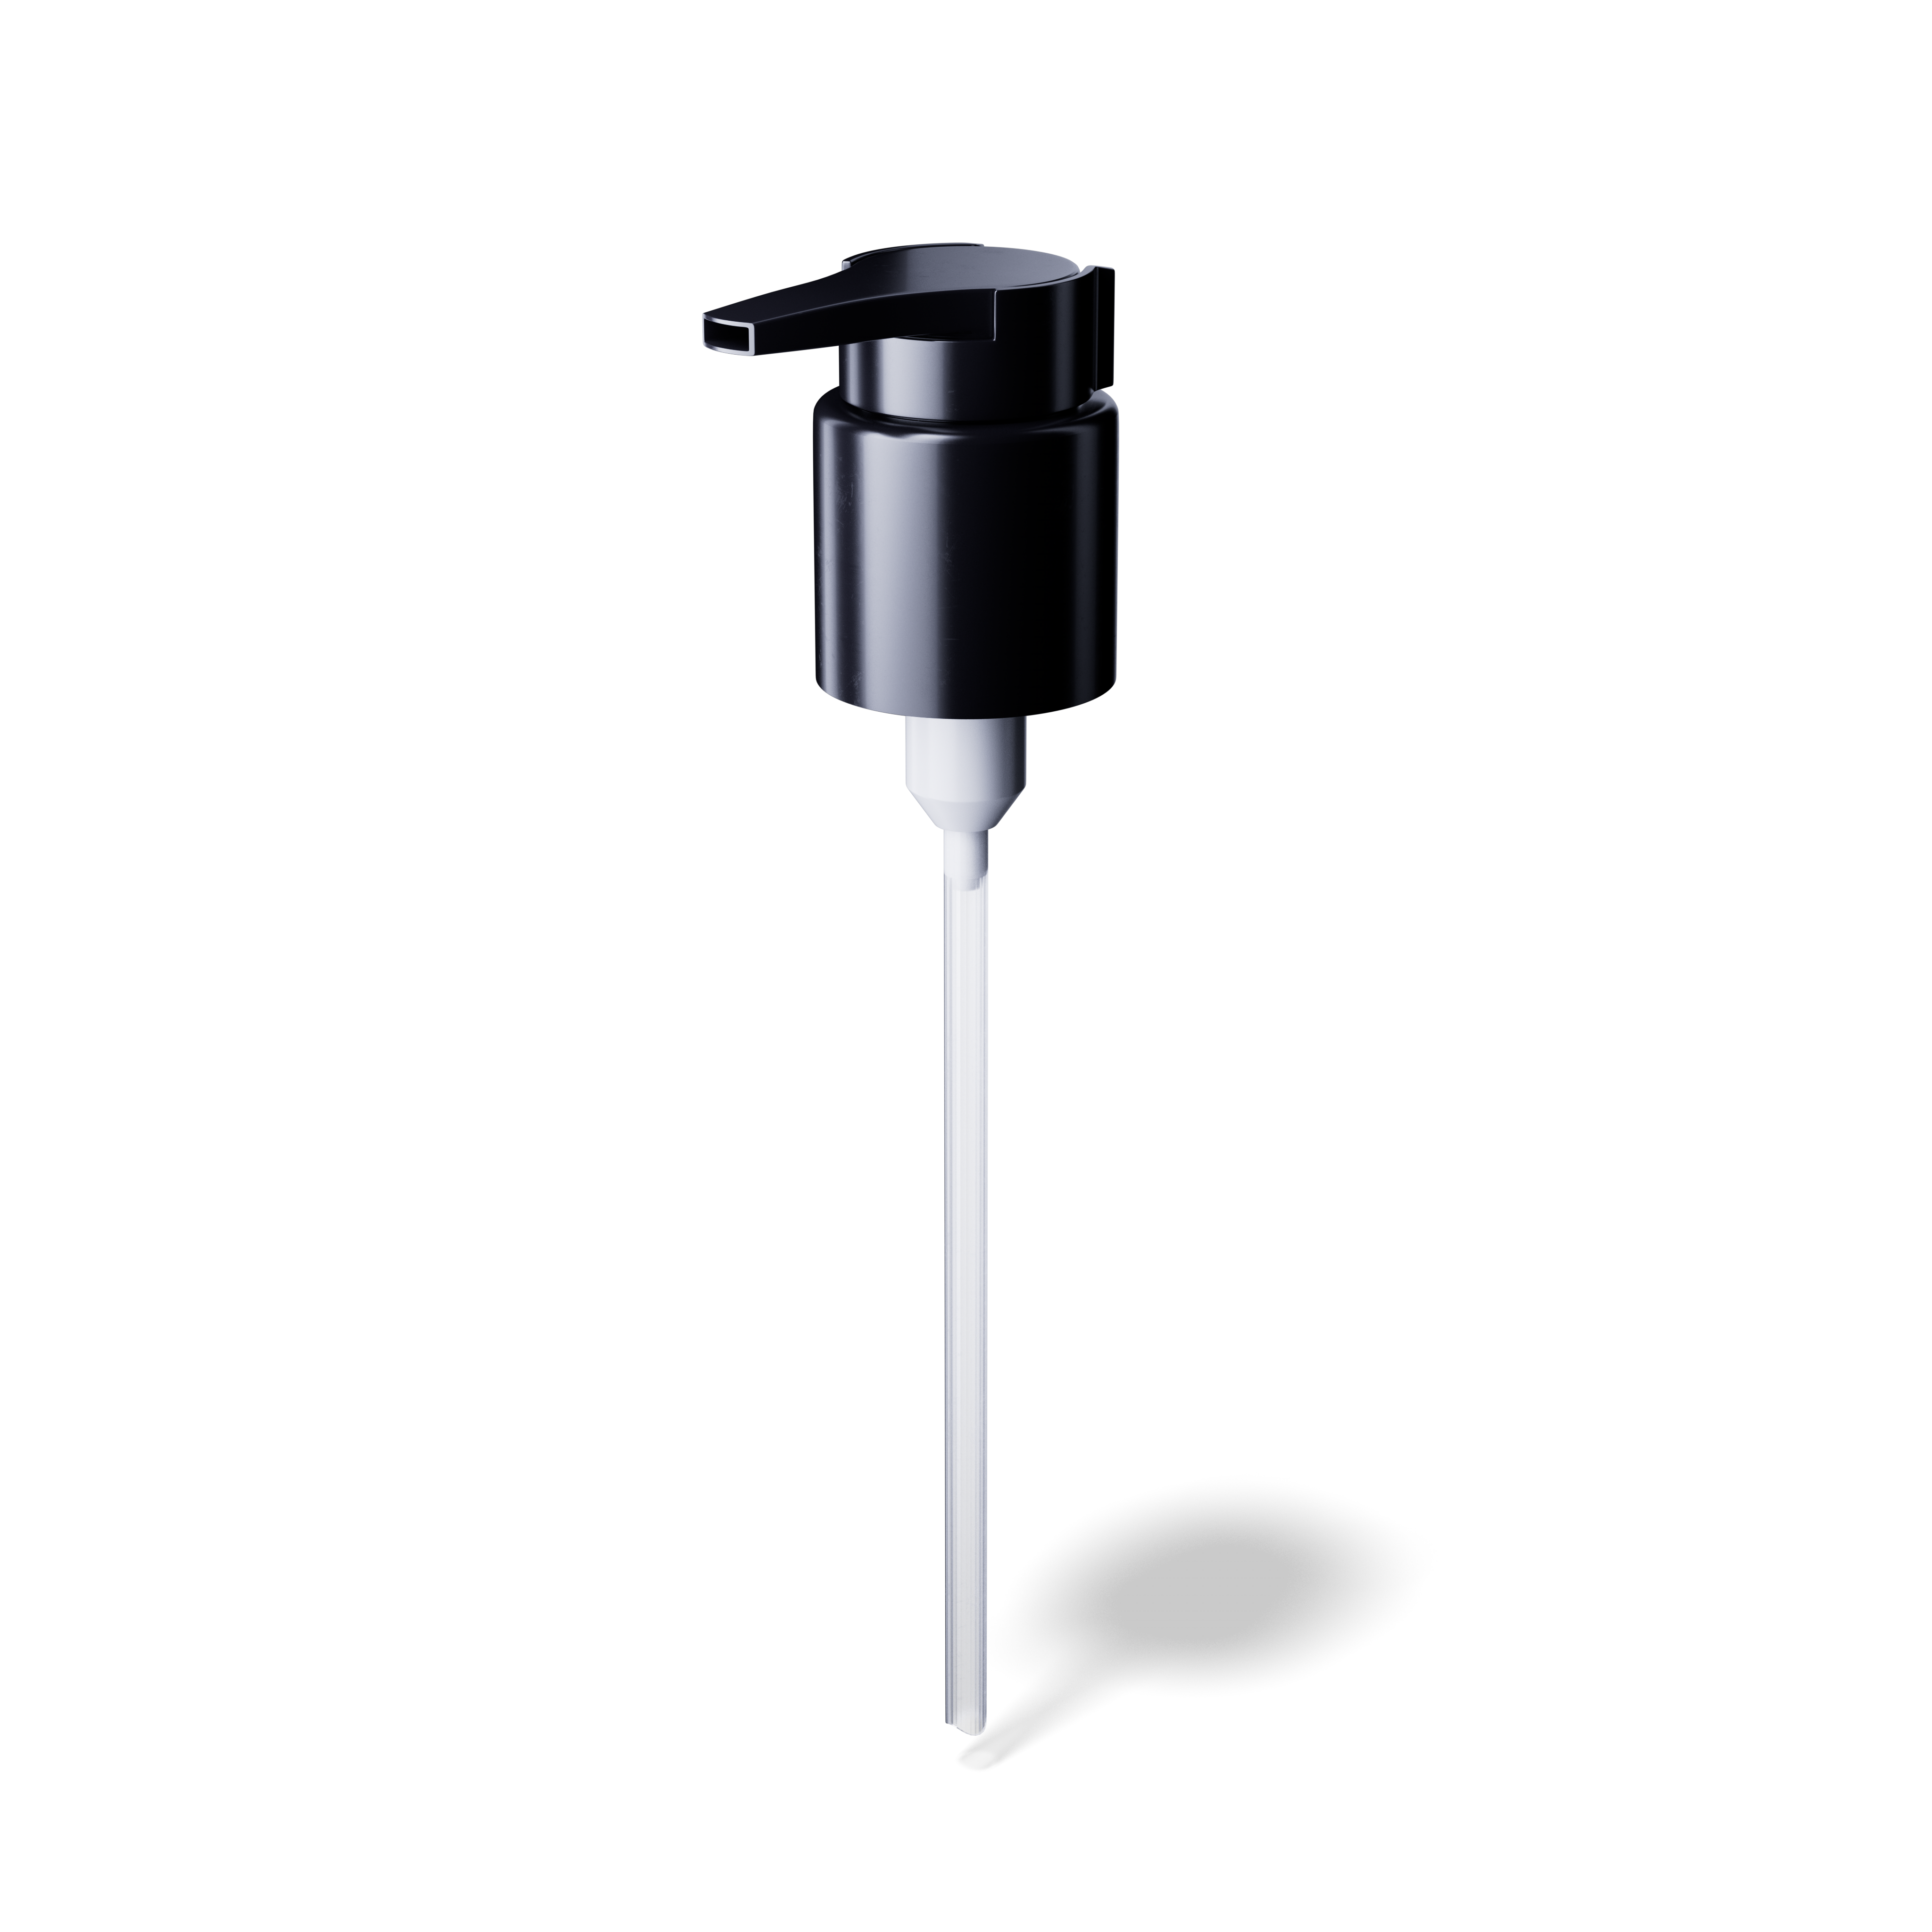 Lotion pump extended nozzle 24/410, PP, black, smooth, dose 0.50ml, security clip (Draco 120)